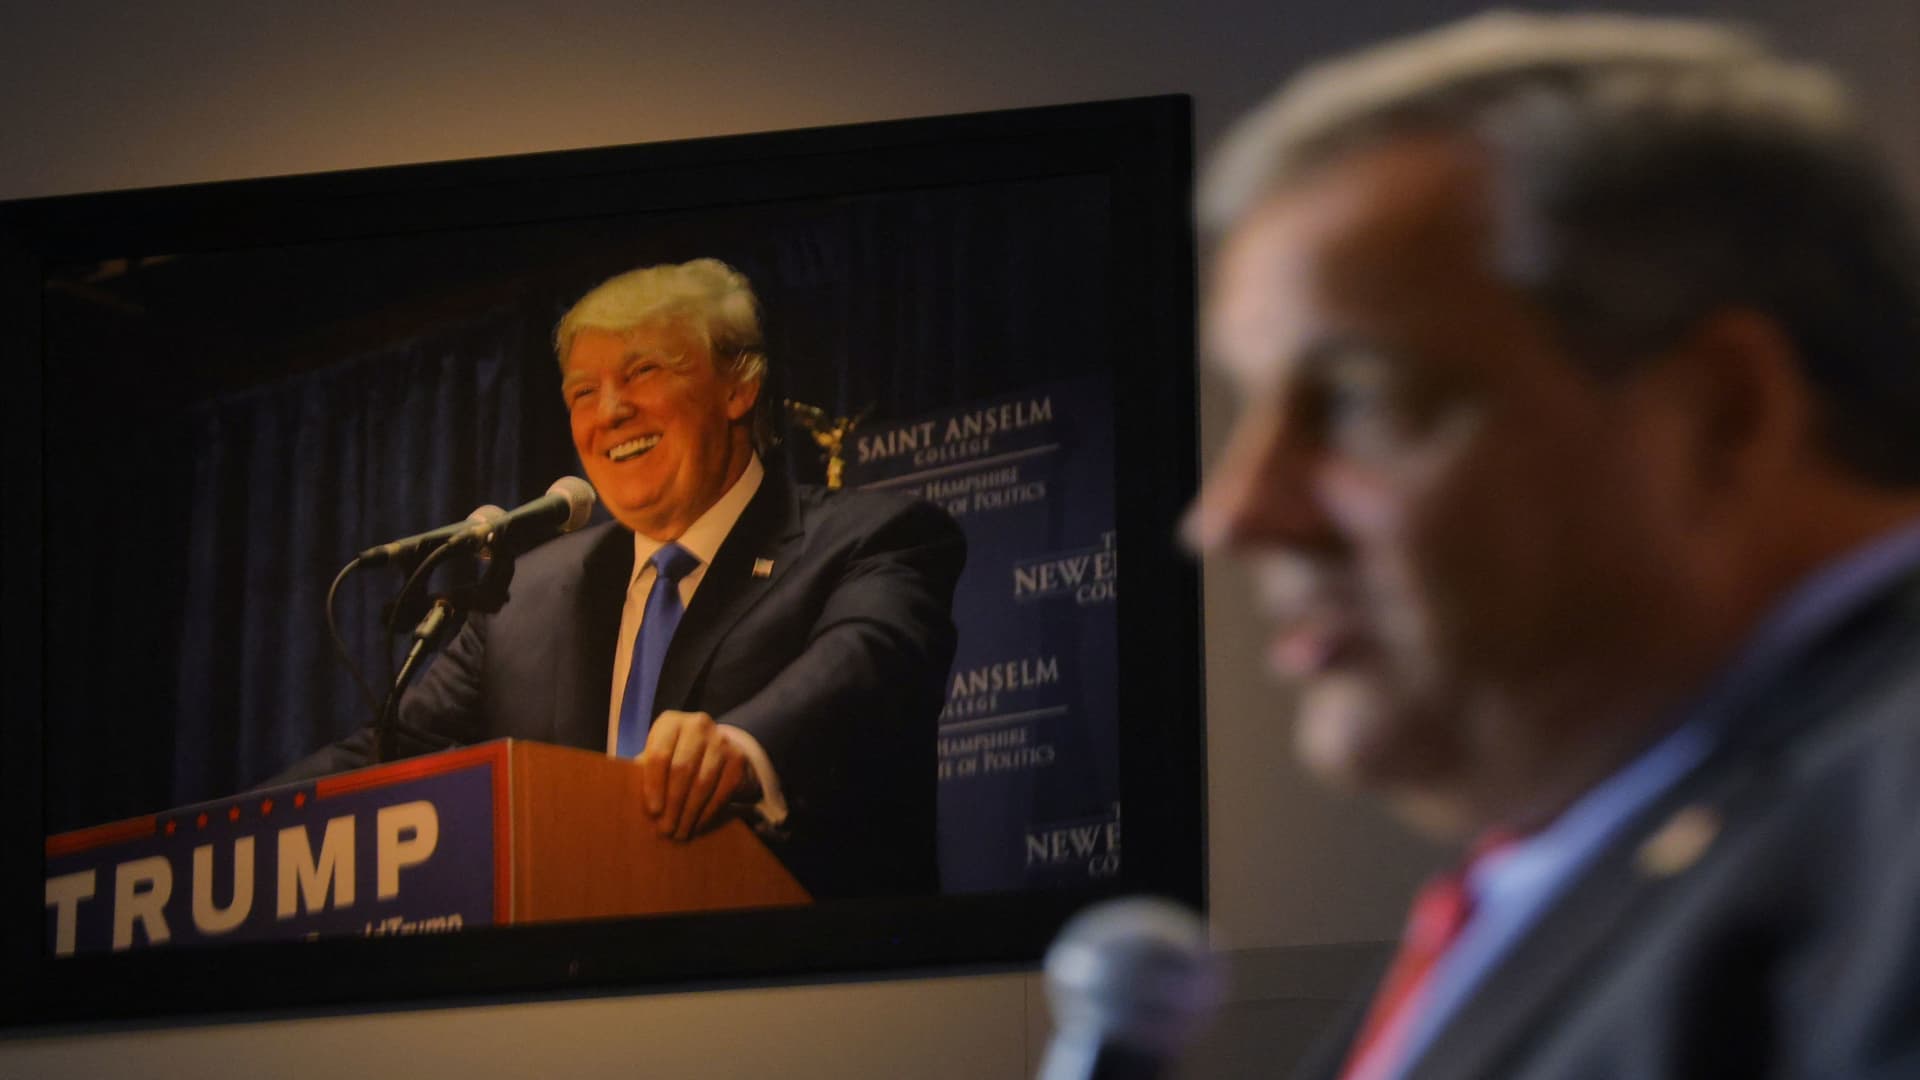 A photograph of former U.S. President Donald Trump hangs on the wall as former New Jersey Governor Chris Christie speaks at the Institute of Politics at St. Anselm College in Manchester, New Hampshire, U.S., March 27, 2023. 